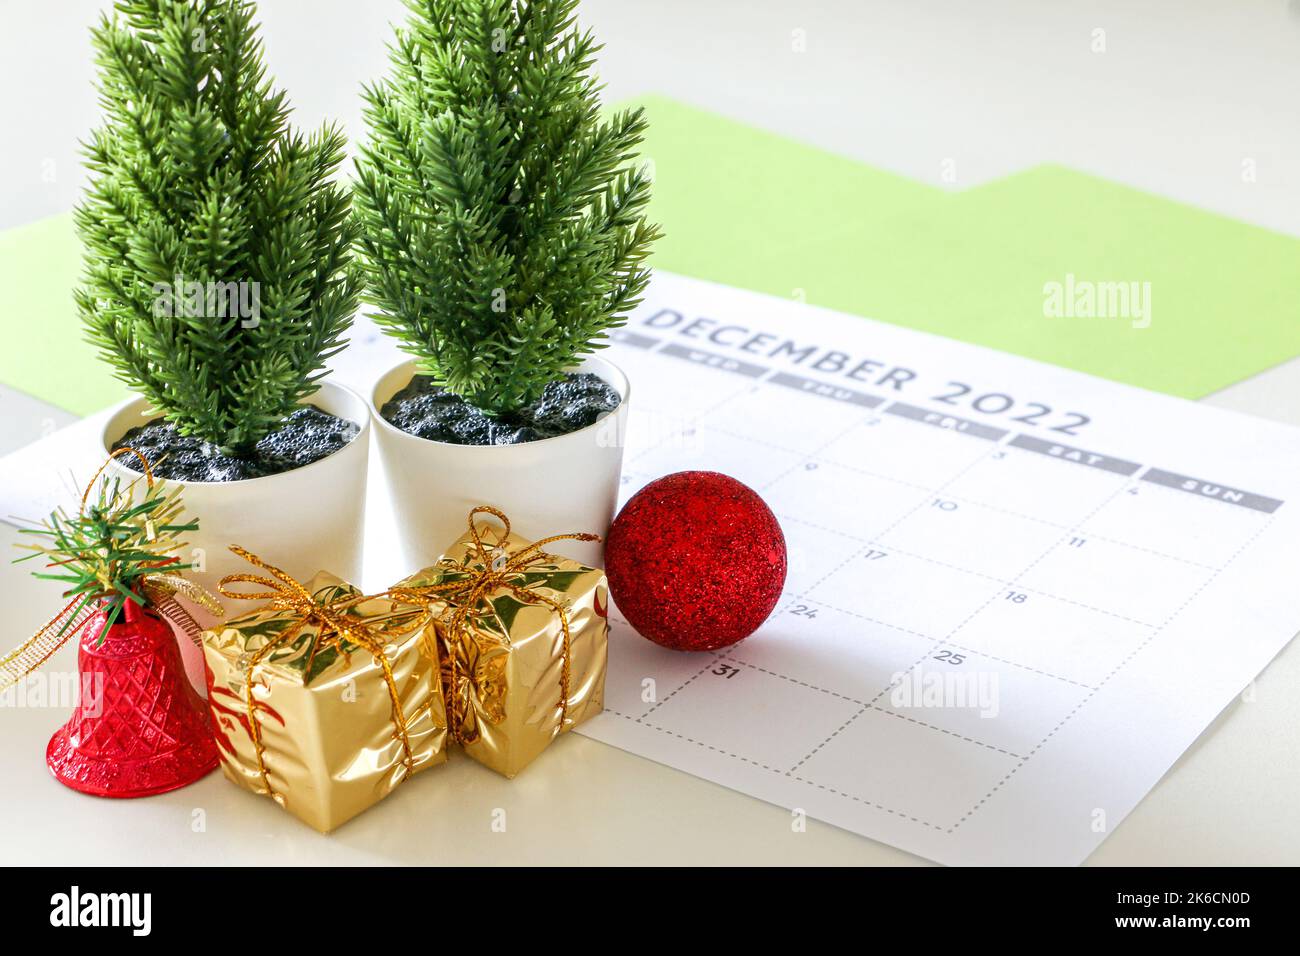 Christmas concept, festive decor, two pine tree plants, two gold wrapped gifts, a shiny red bell, and a red bauble, on December calendar Stock Photo